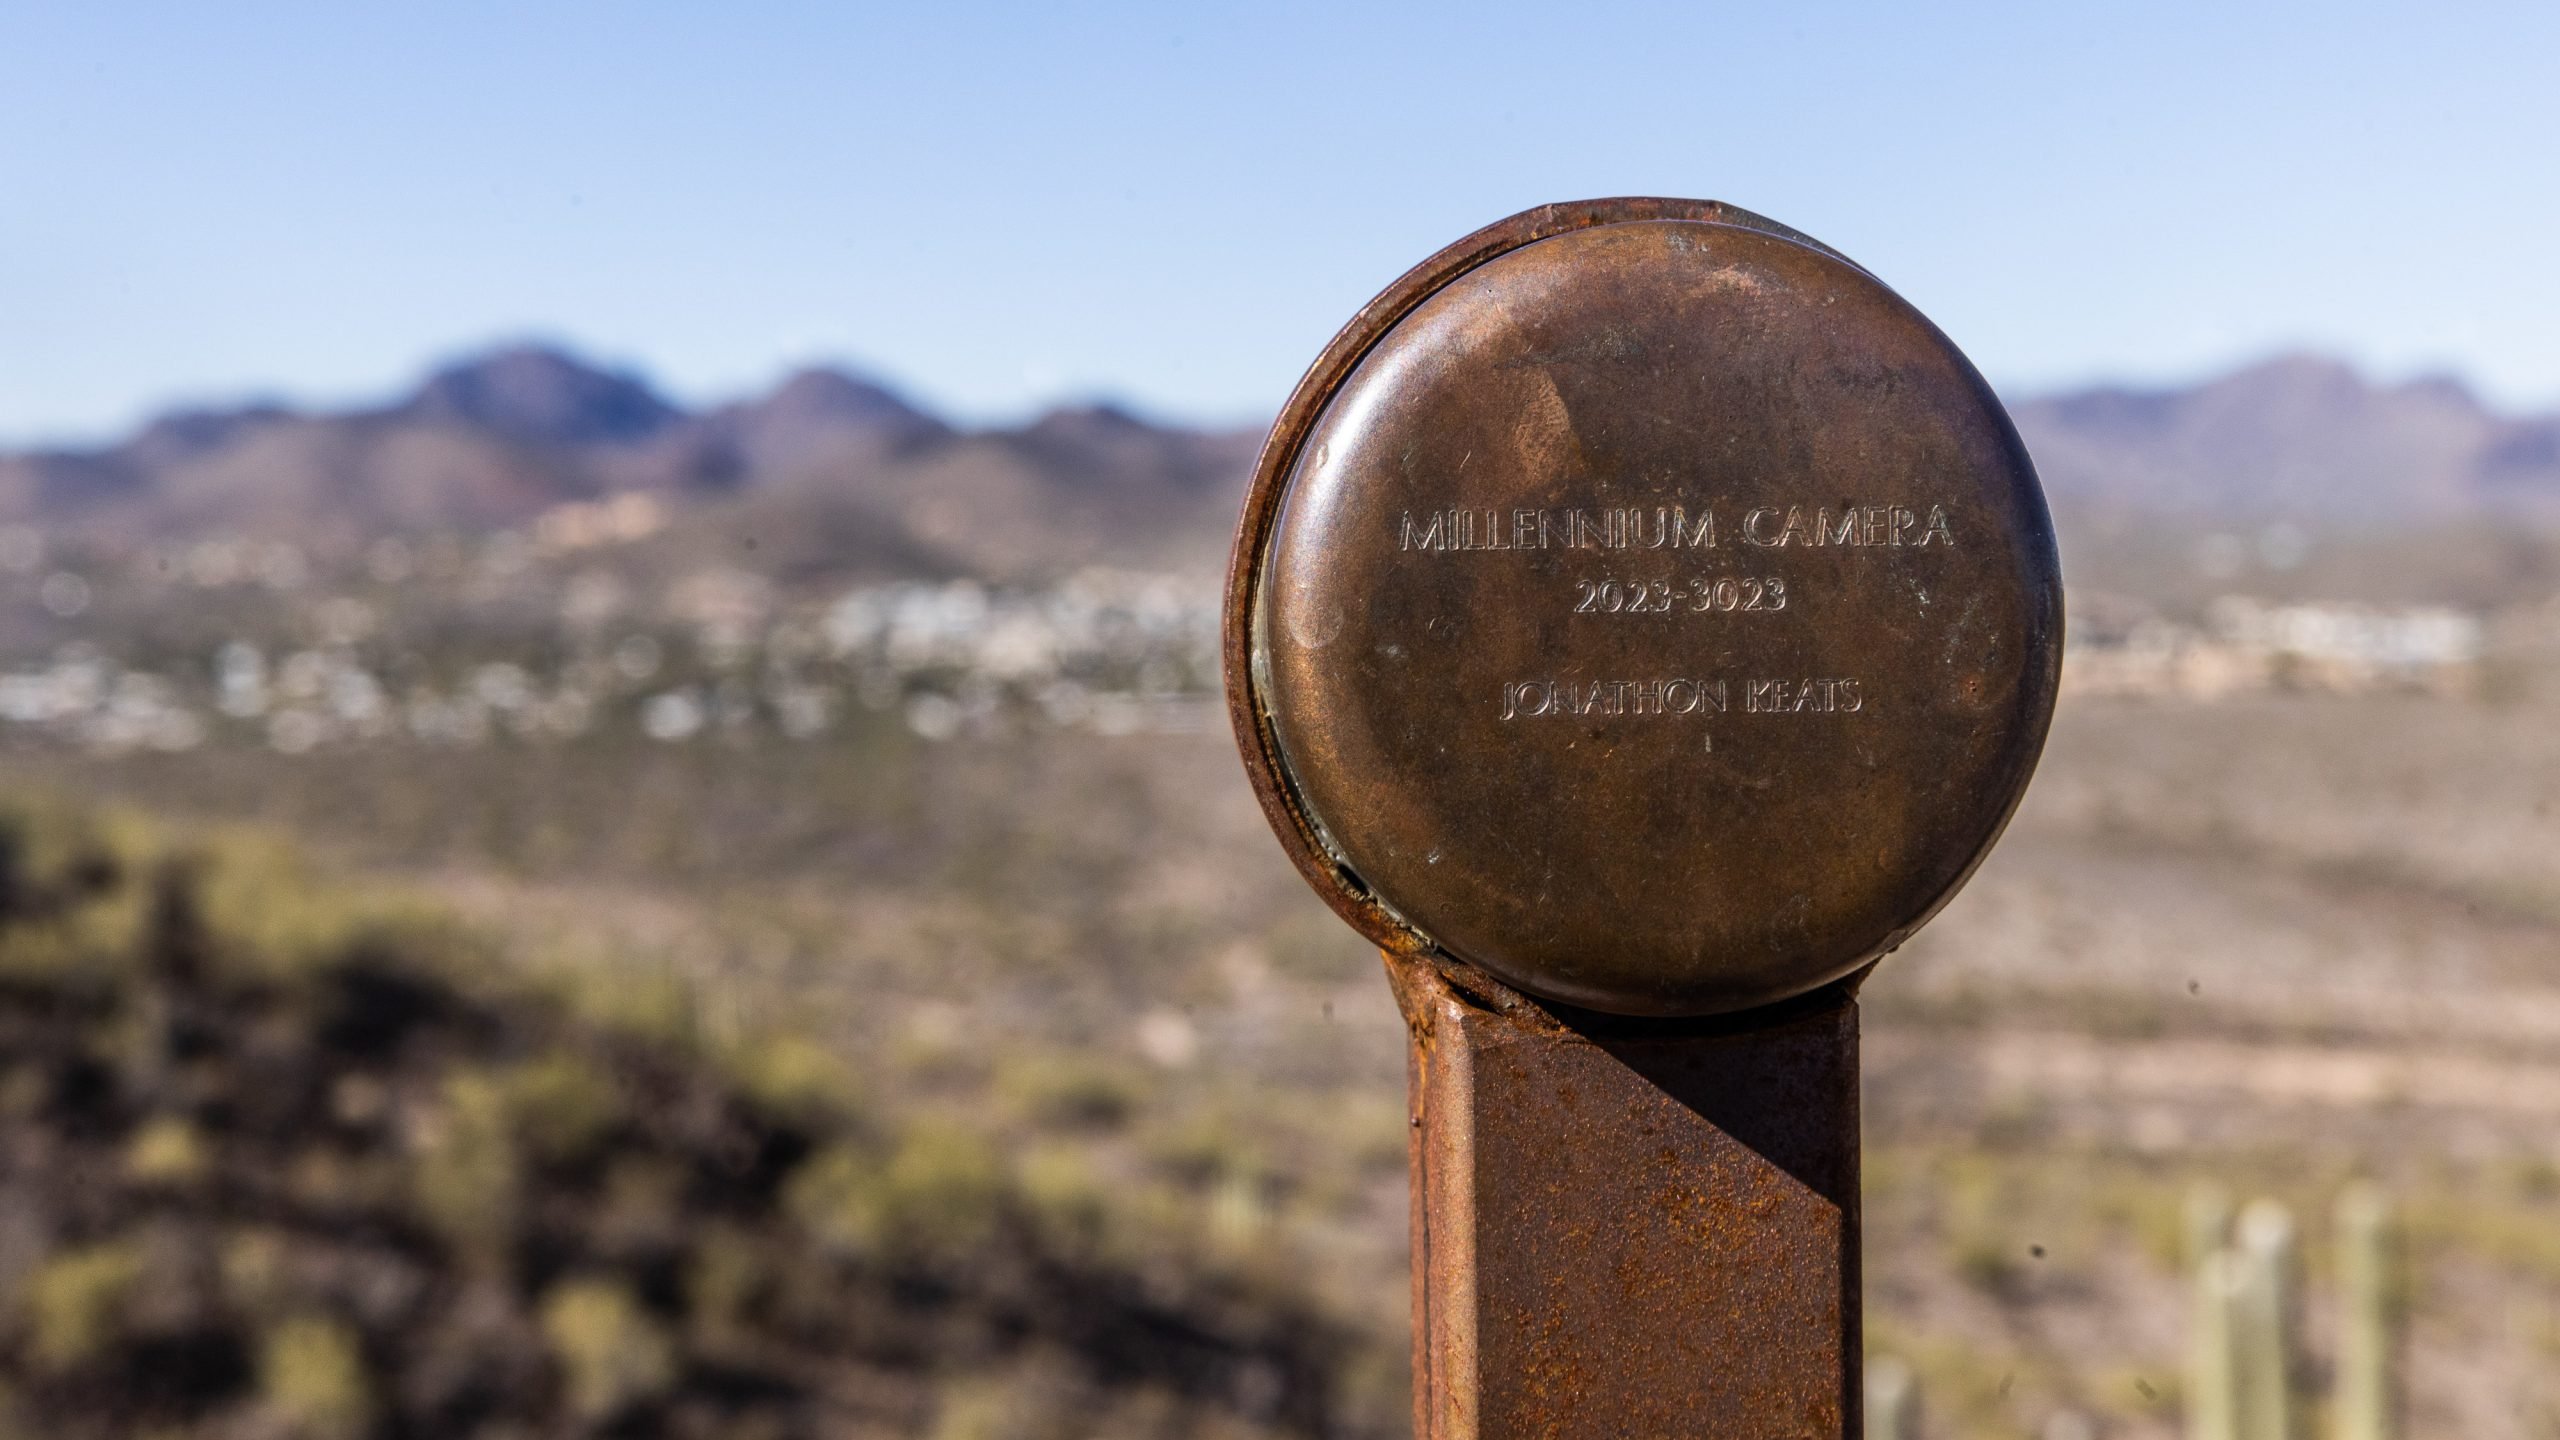 Millennium camera installed in Arizona but the photo won't be ready for 1000 years